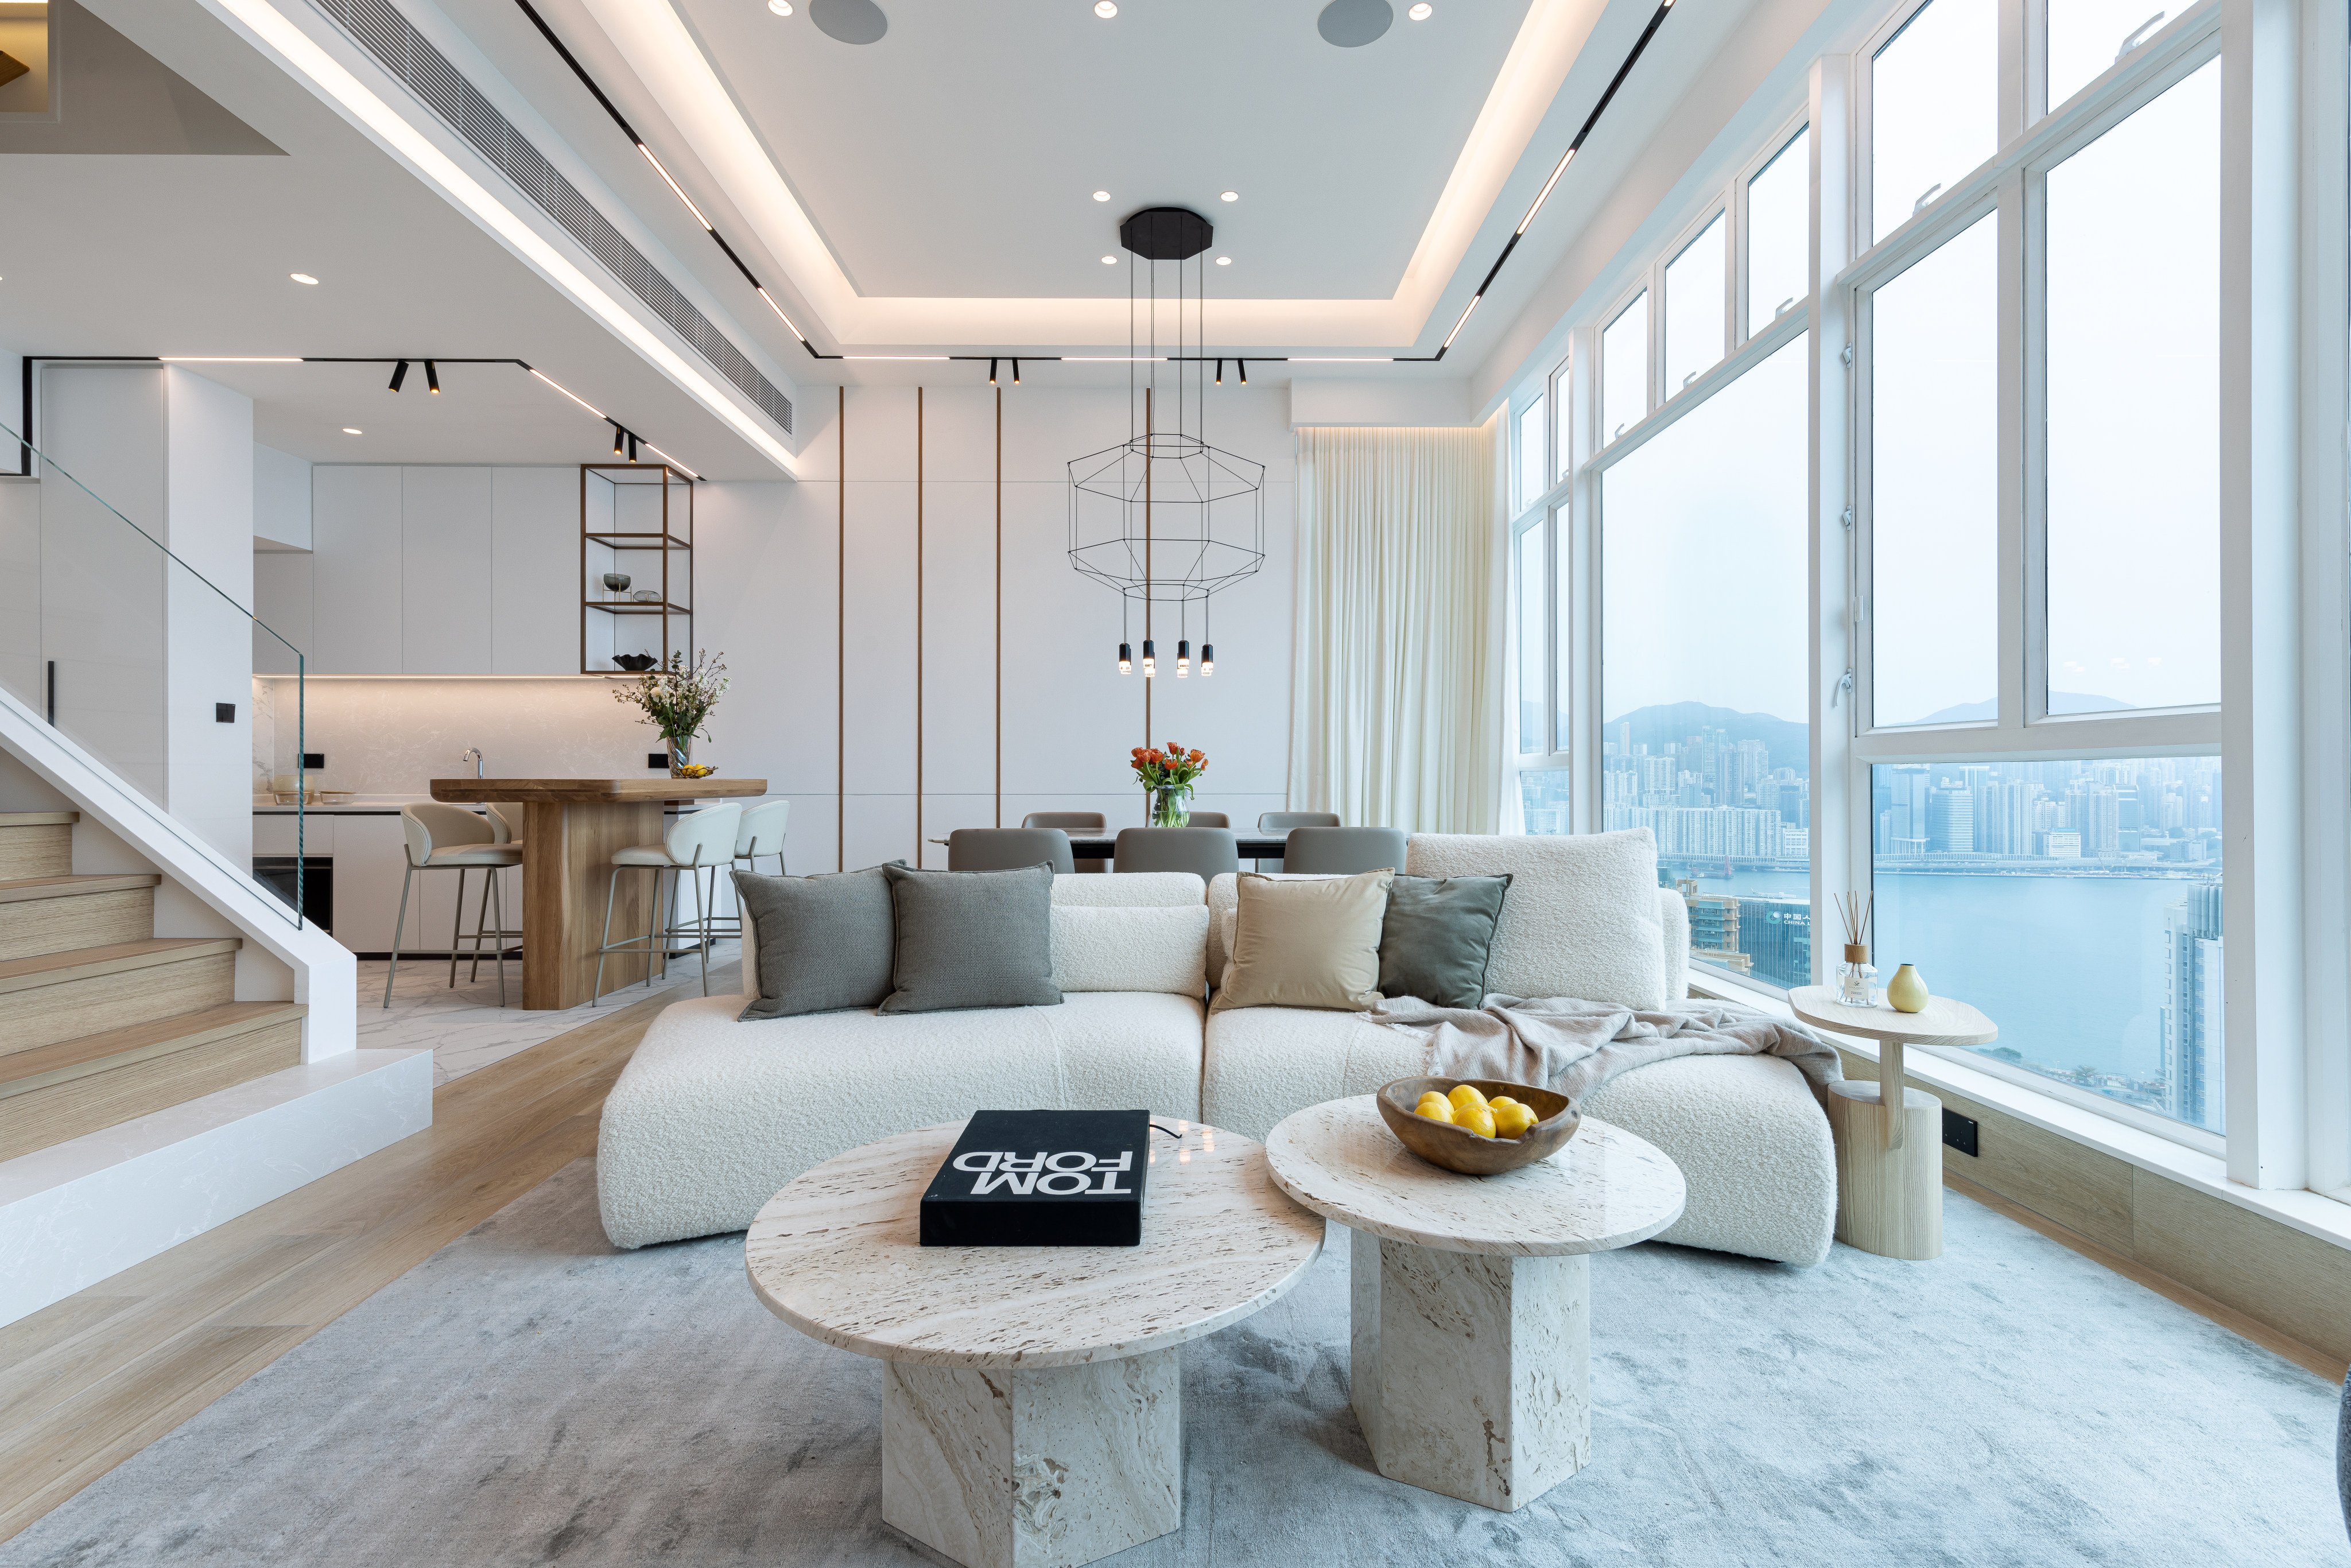 The living room of the Lin family’s Hung Hom penthouse flat. Fifteen years after the family of three moved into the place, they sought “a new living experience”. Photo: Dick Leung